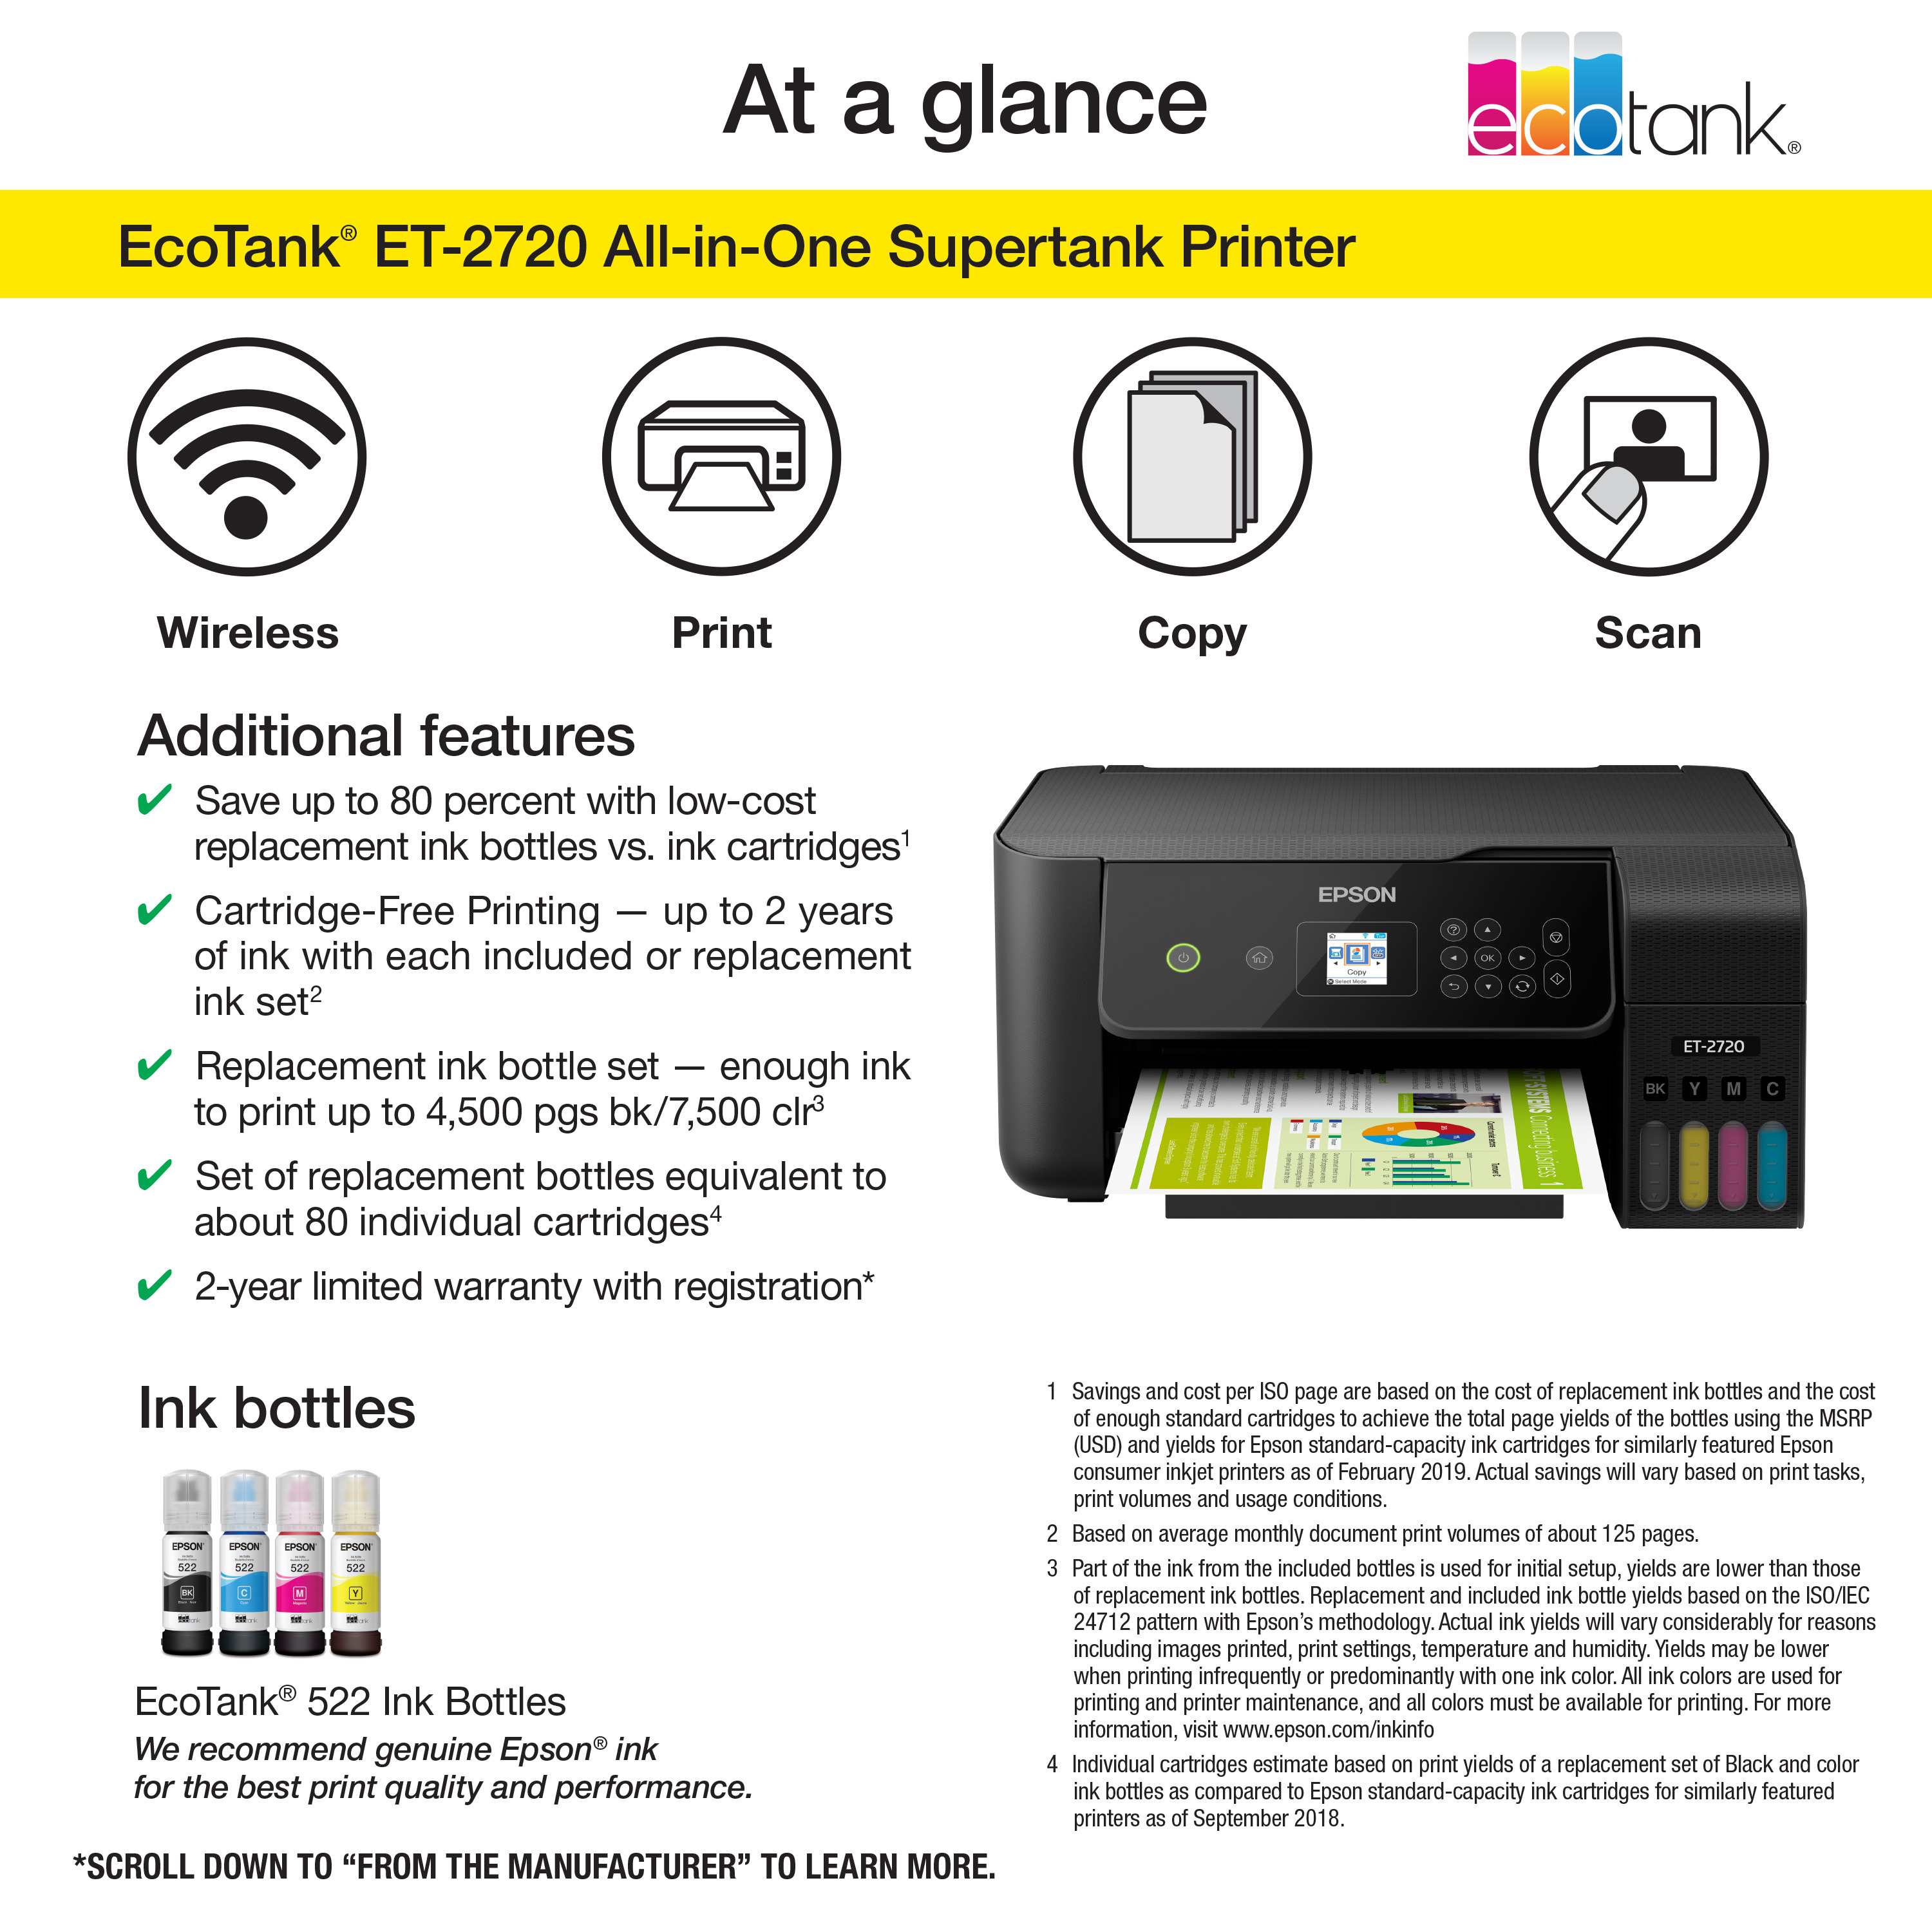 Epson EcoTank ET-2720 Wireless All-in-One Color Supertank Printer - Black - image 4 of 4